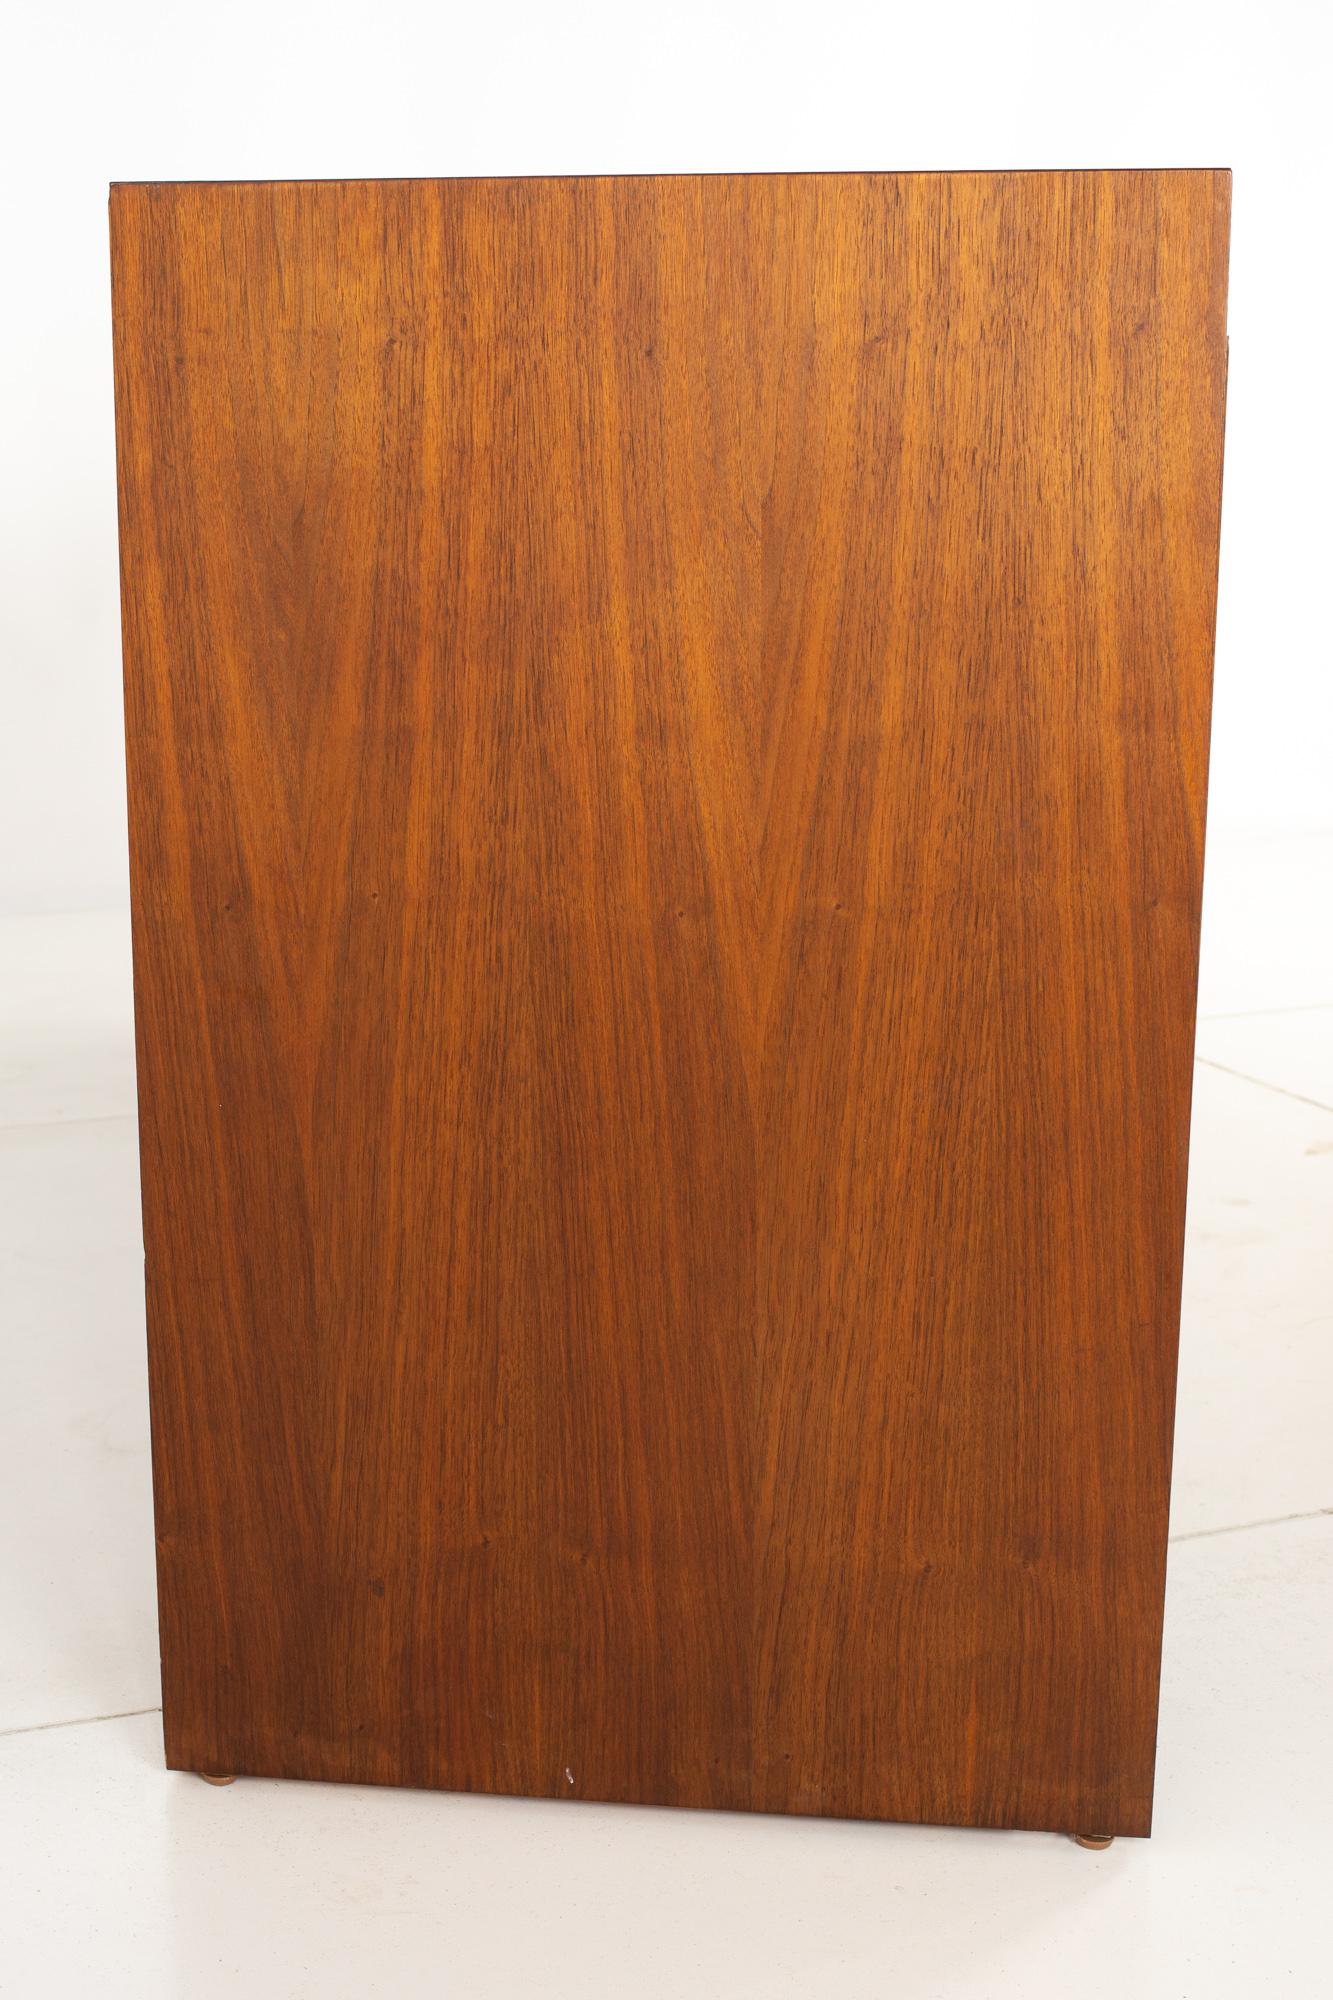 Dillingham Midcentury Pecky Cypress and Walnut Sideboard Credenza Buffet 2